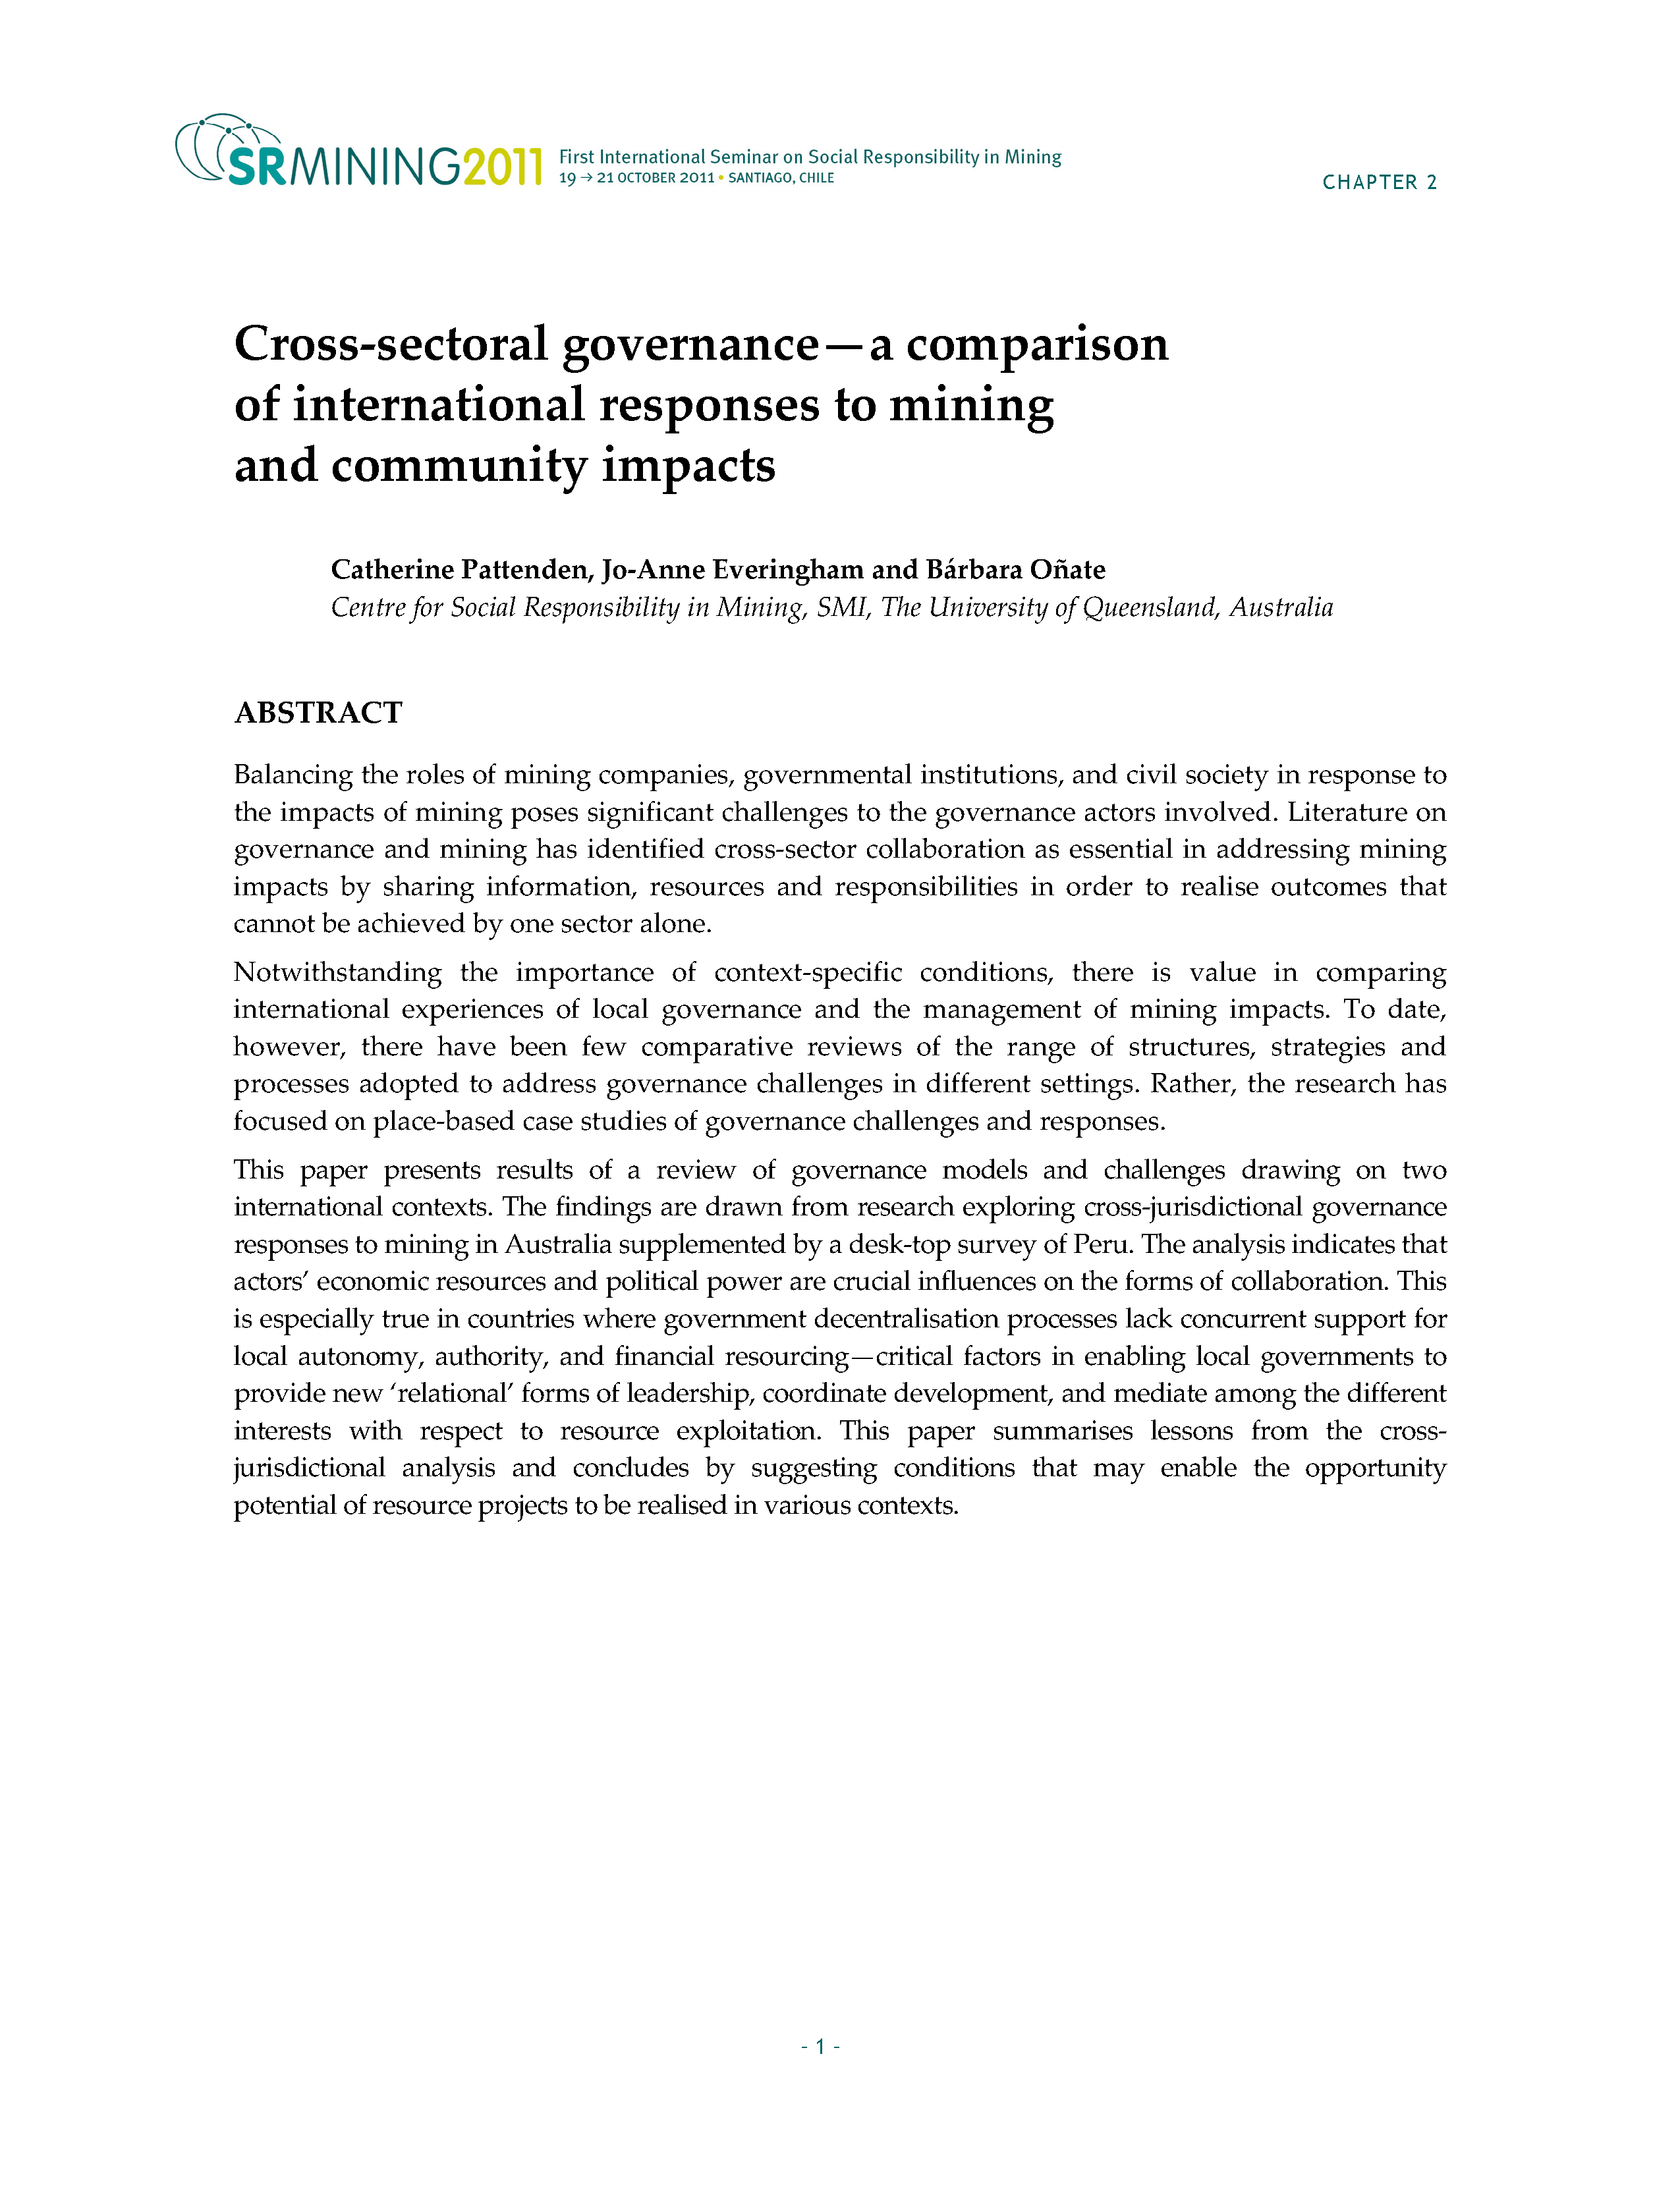 Cross-sectoral governance - a comparison of international responses to mining and community impacts